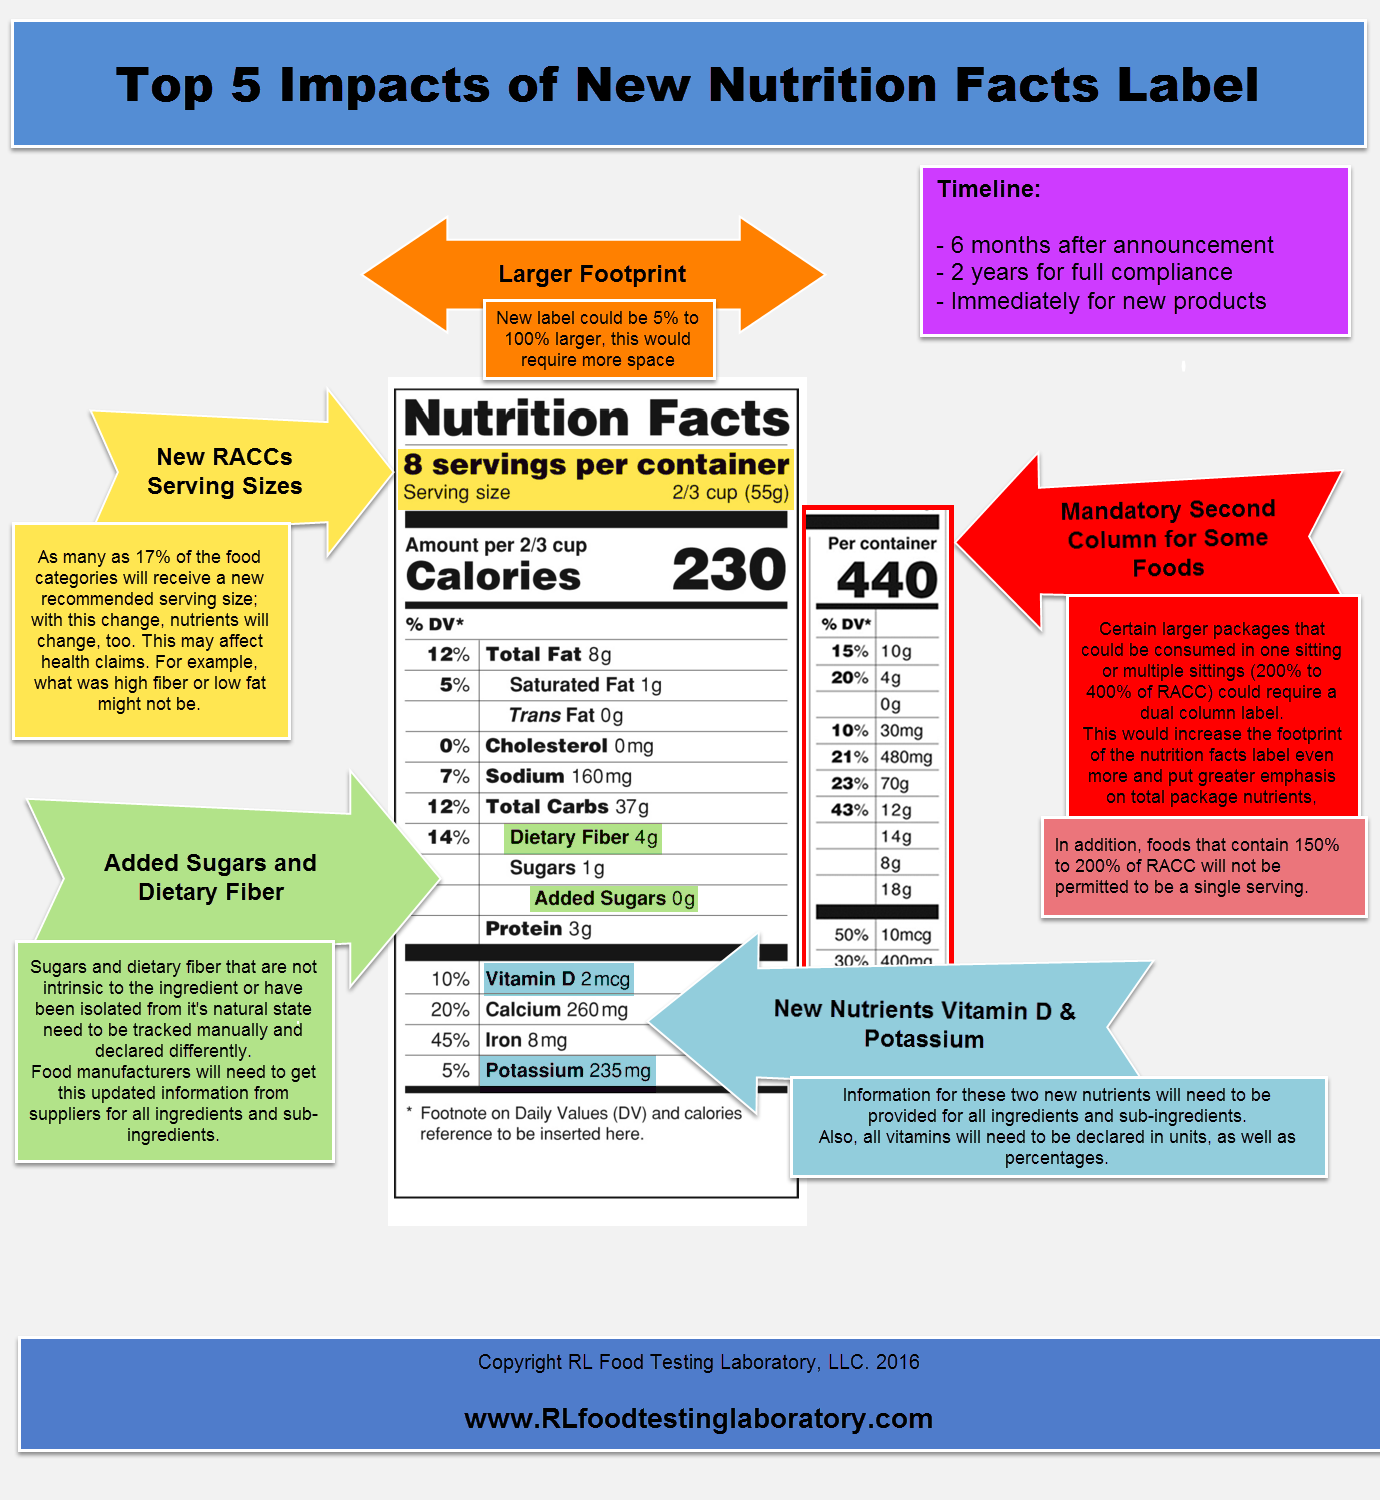 Consumers are now beginning to see the new nutrition labels on some food products and are reacting positively to the changes.